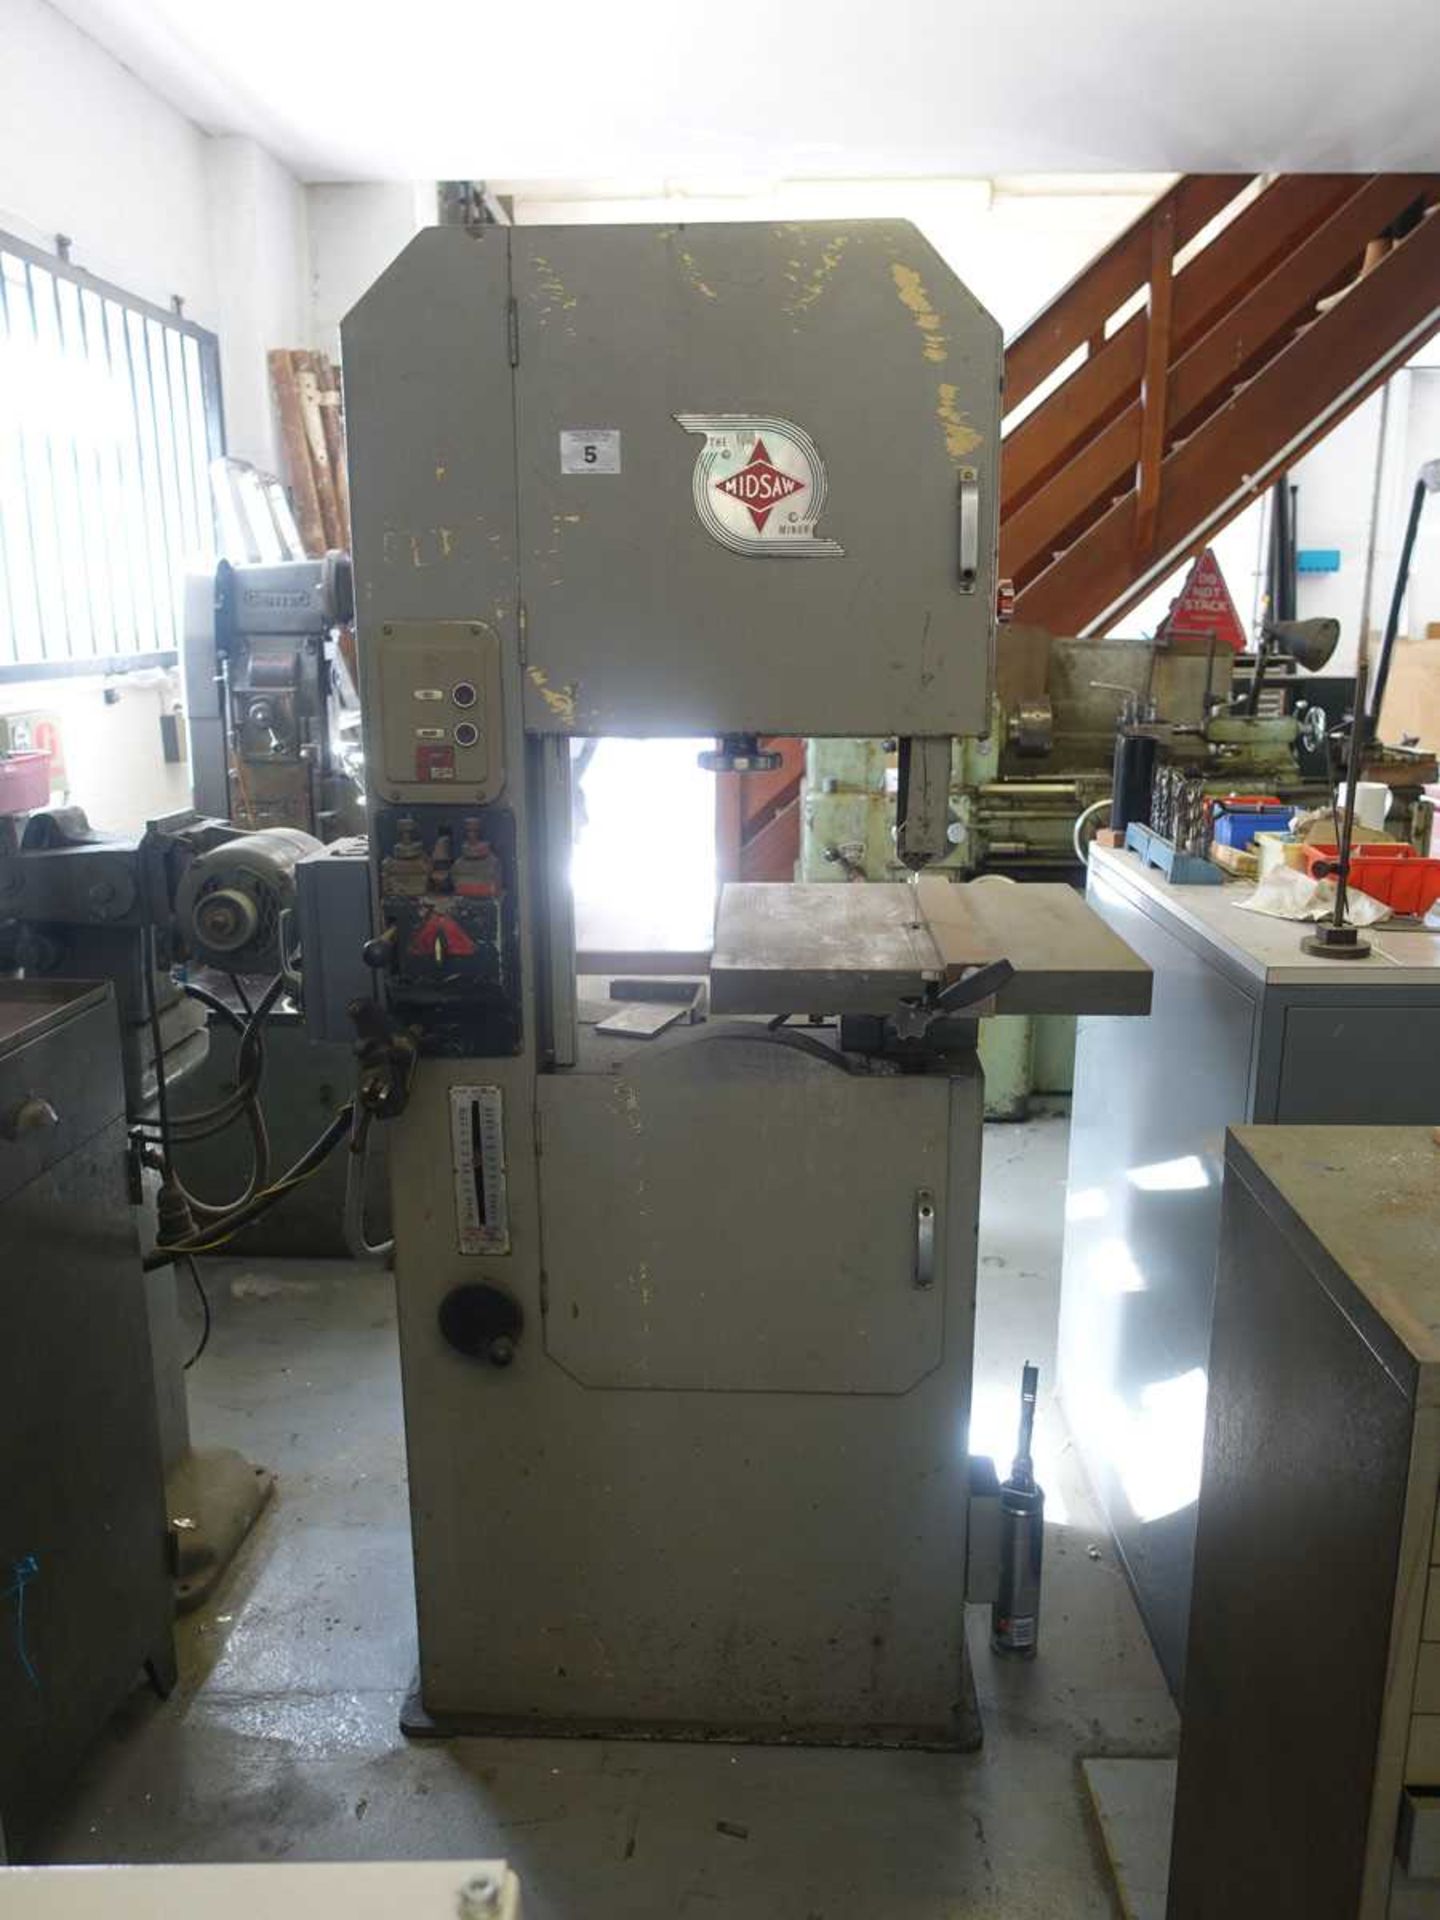 +VAT Midsaw Minor vertical bandsaw with band welder, 400mm throat - Image 4 of 4